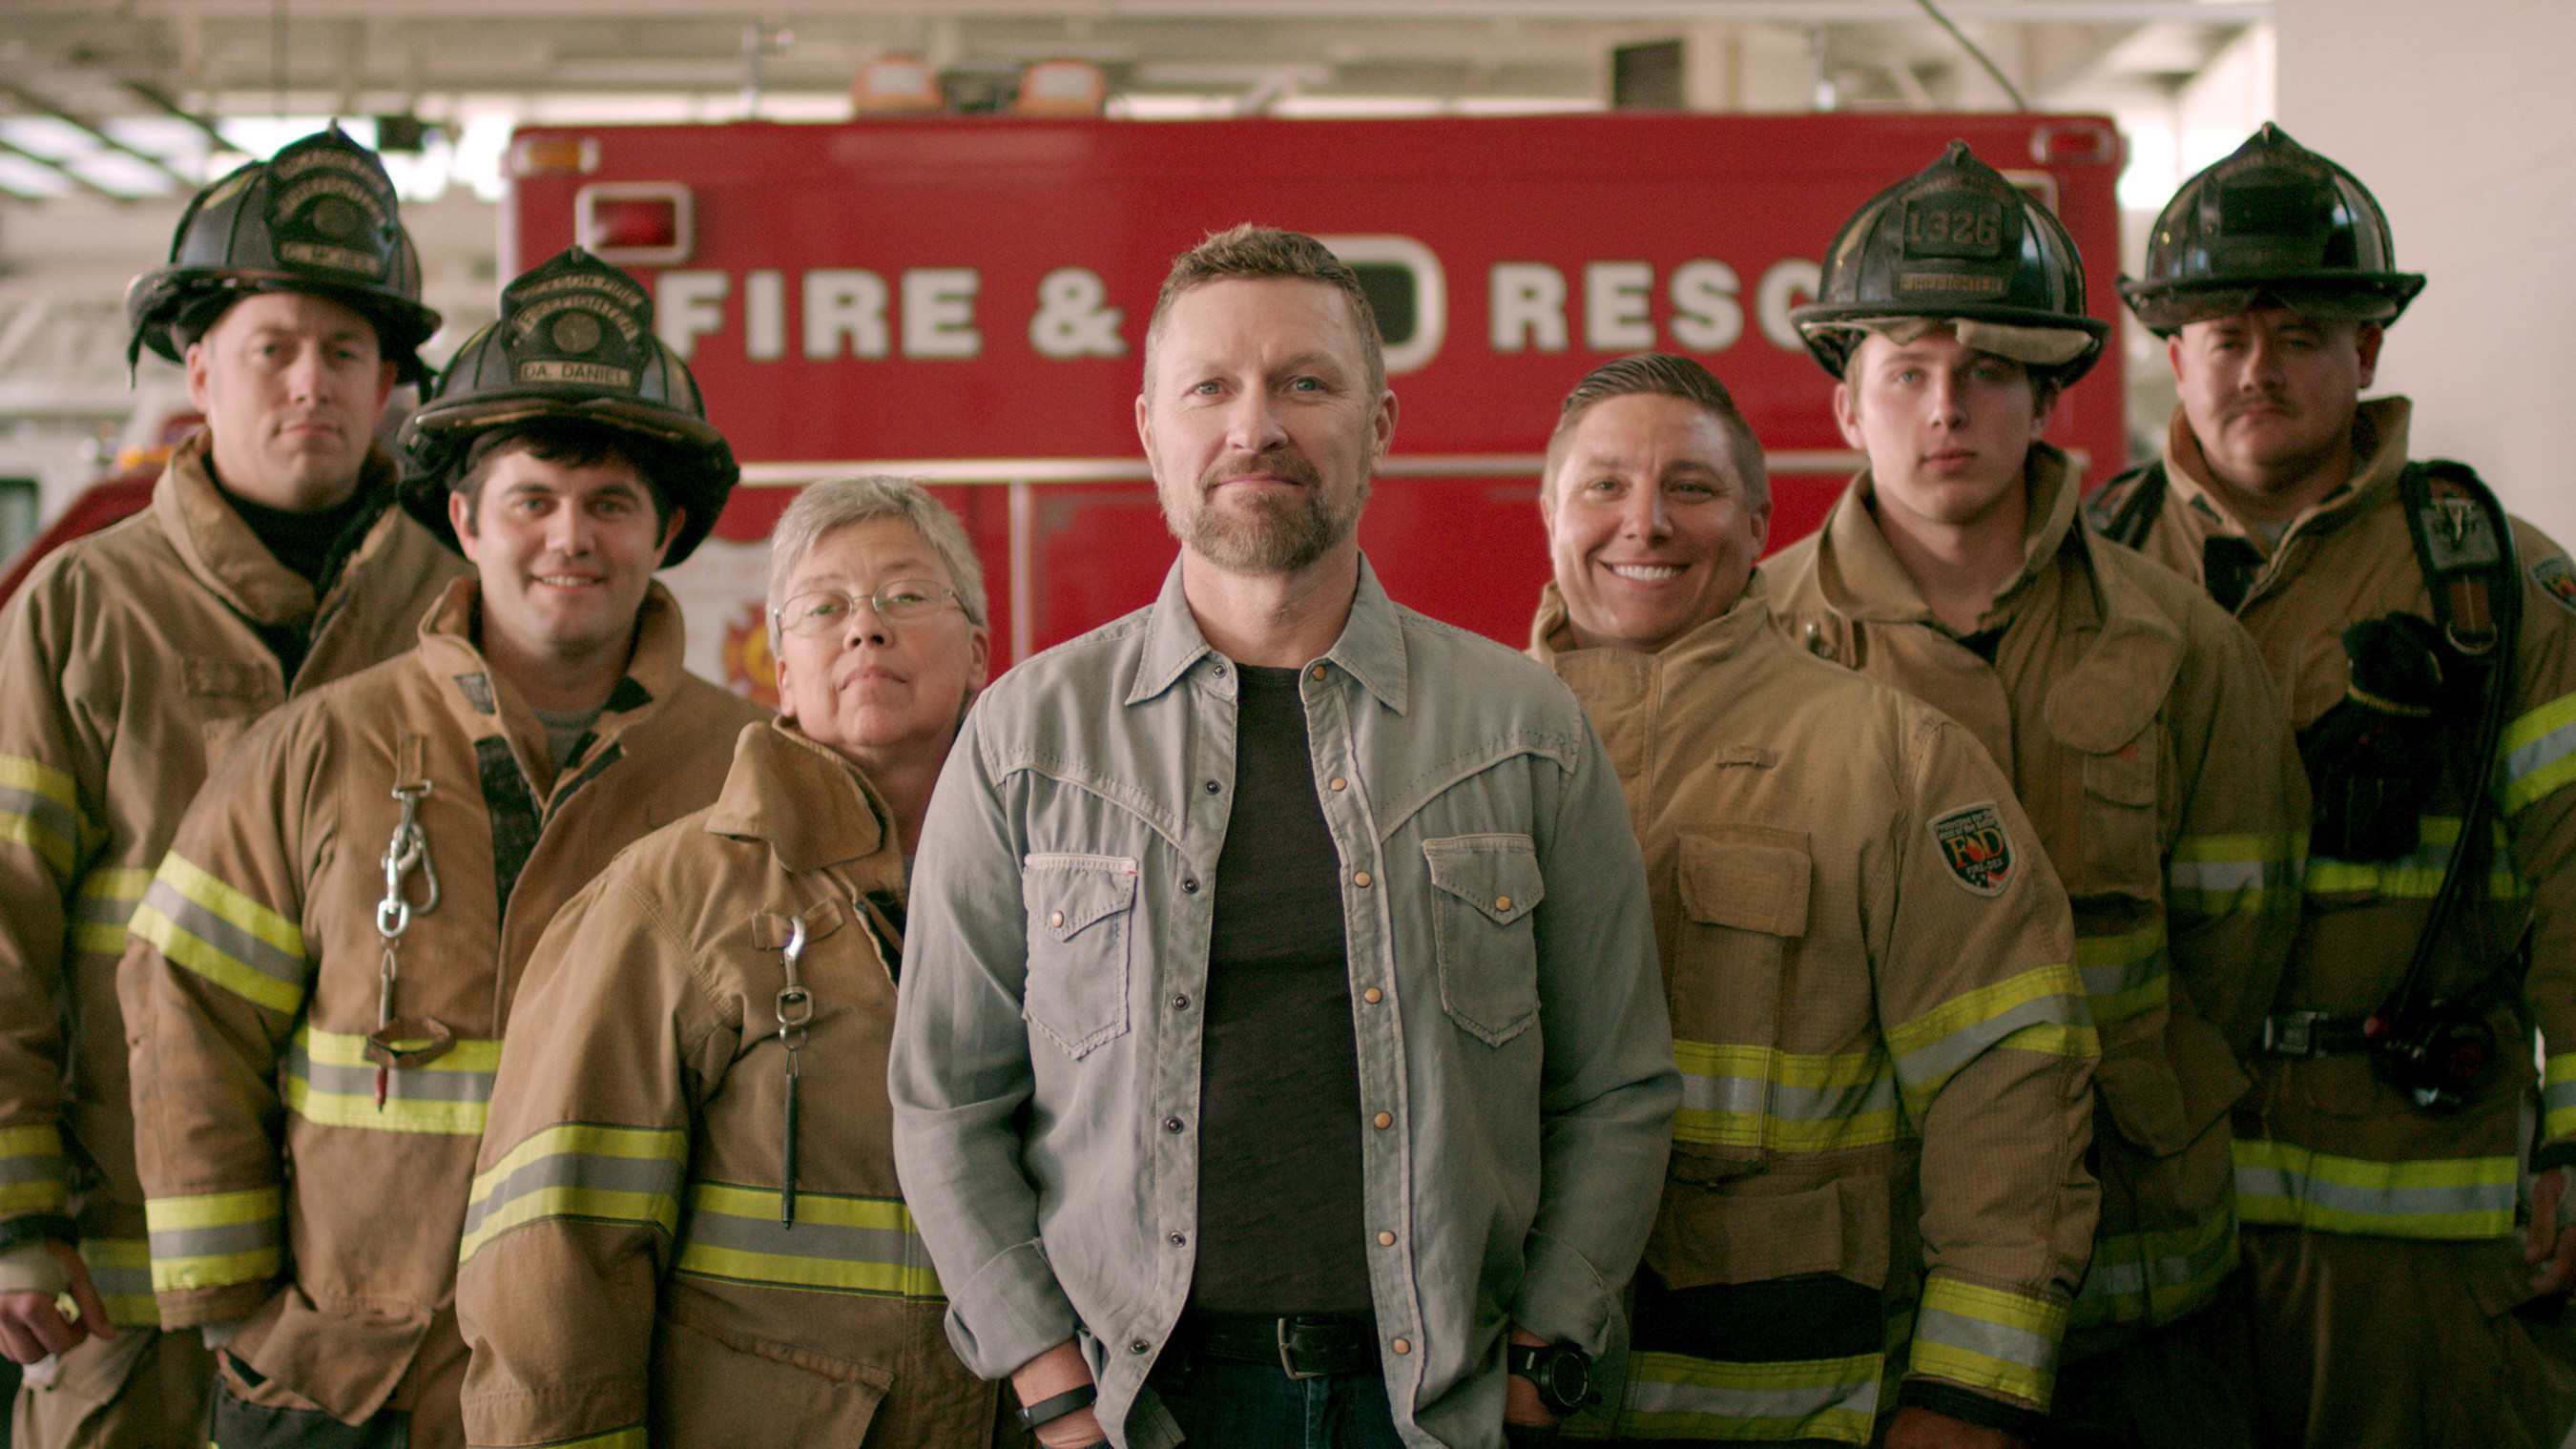 Kidde Fire Safety has teamed up with Craig Morgan, Country Music star and former first responder, Firehouse, the International Association of Fire Chiefs (IAFC), the National Fire Protection Association (NFPA) and National Fallen Firefighters Foundation to launch "Step Up and Stand Out," a national campaign to increase awareness of the need for volunteer firefighters. To learn more, go to www.firehouse.com/vf.